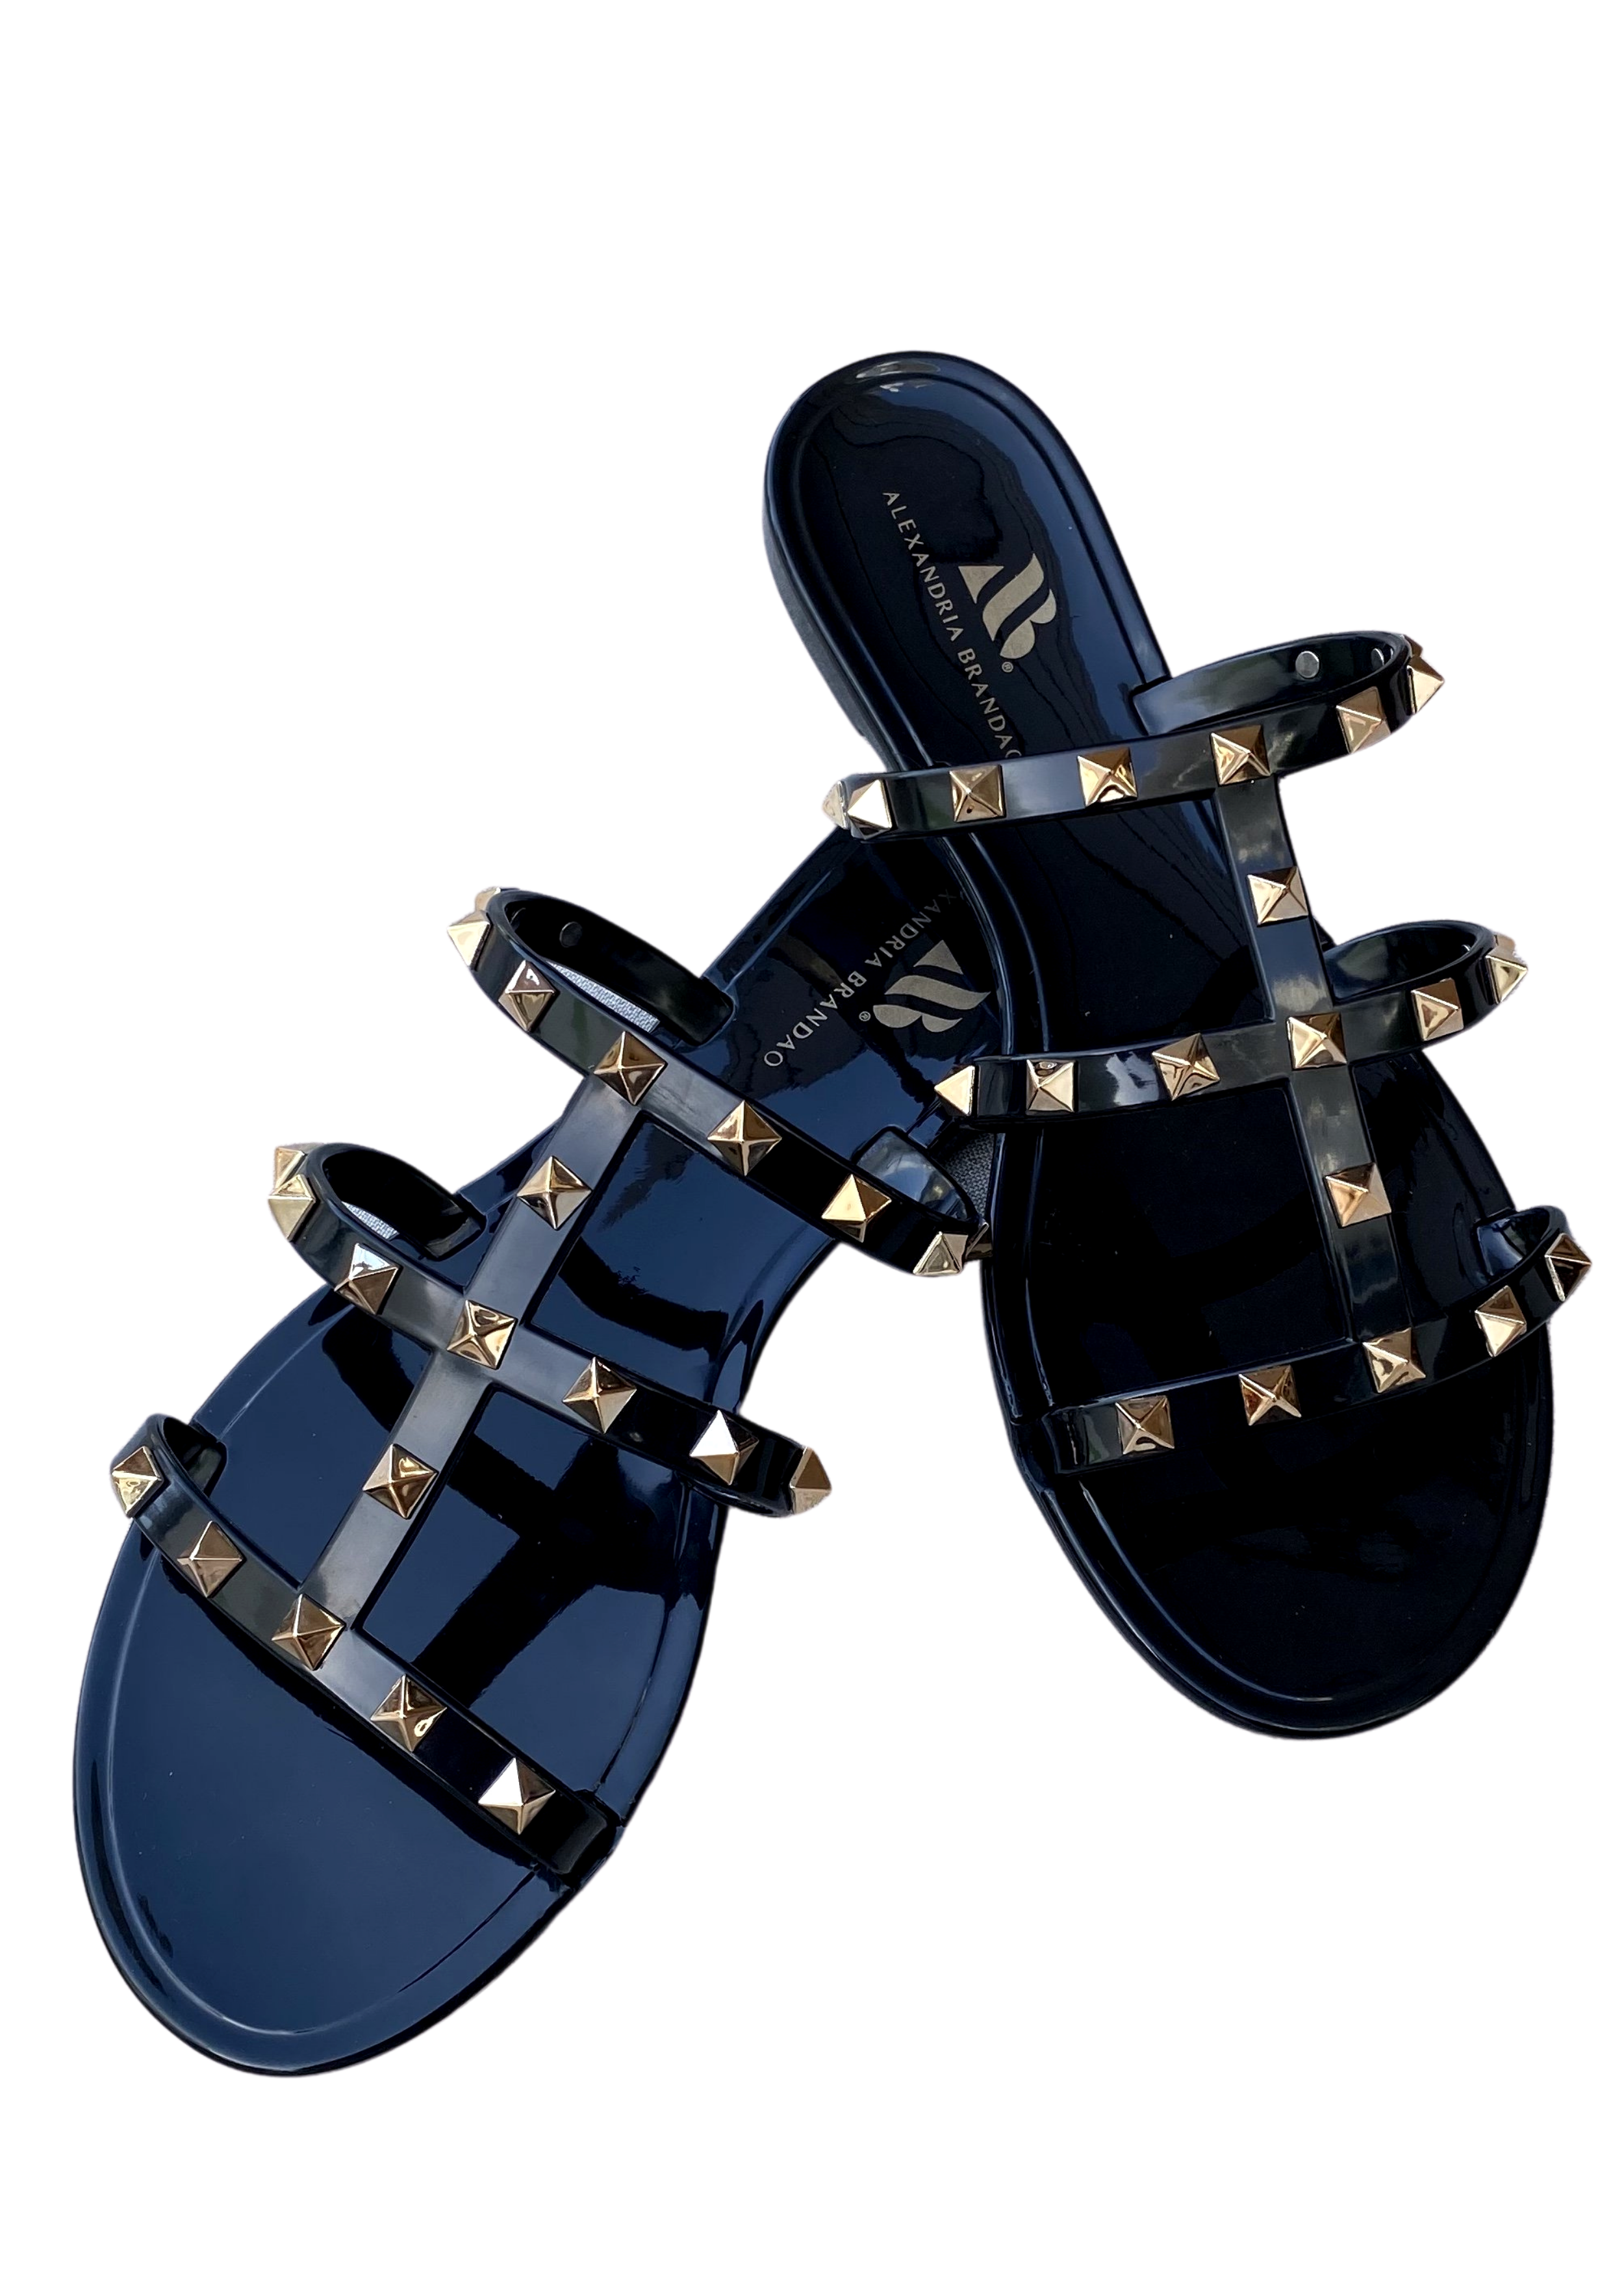 Aurora Black Jelly sandal that has  Gold Studs on all straps and is a slip on sandal.  Sandal has three equally separated horizontal straps that goes all the way to top of the bridge of the foot and one strap in the middle connecting all straps